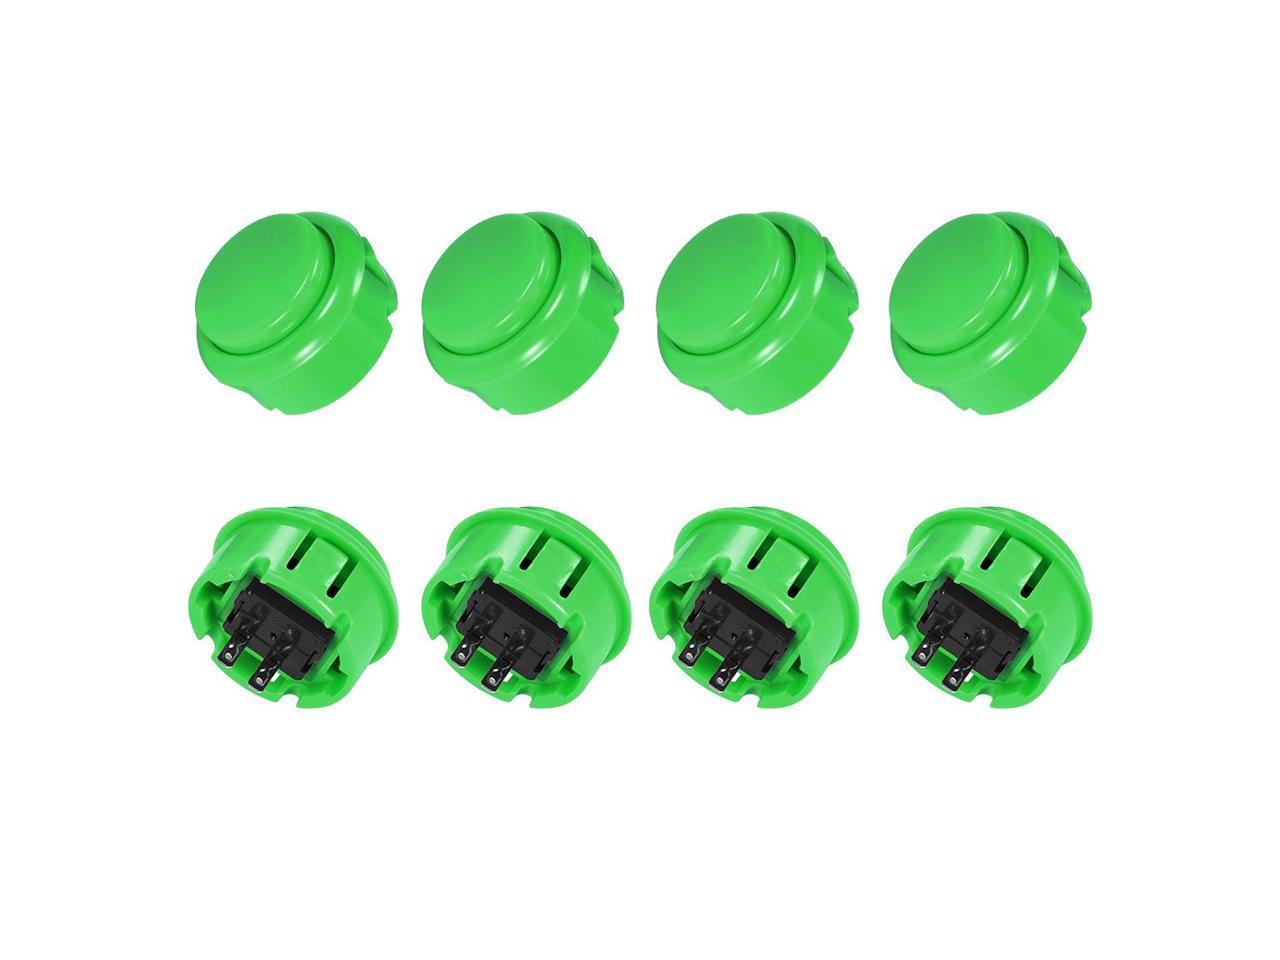 Details about   30mm Mounting Momentary Game Push Button for Video Games Green 5pcs 